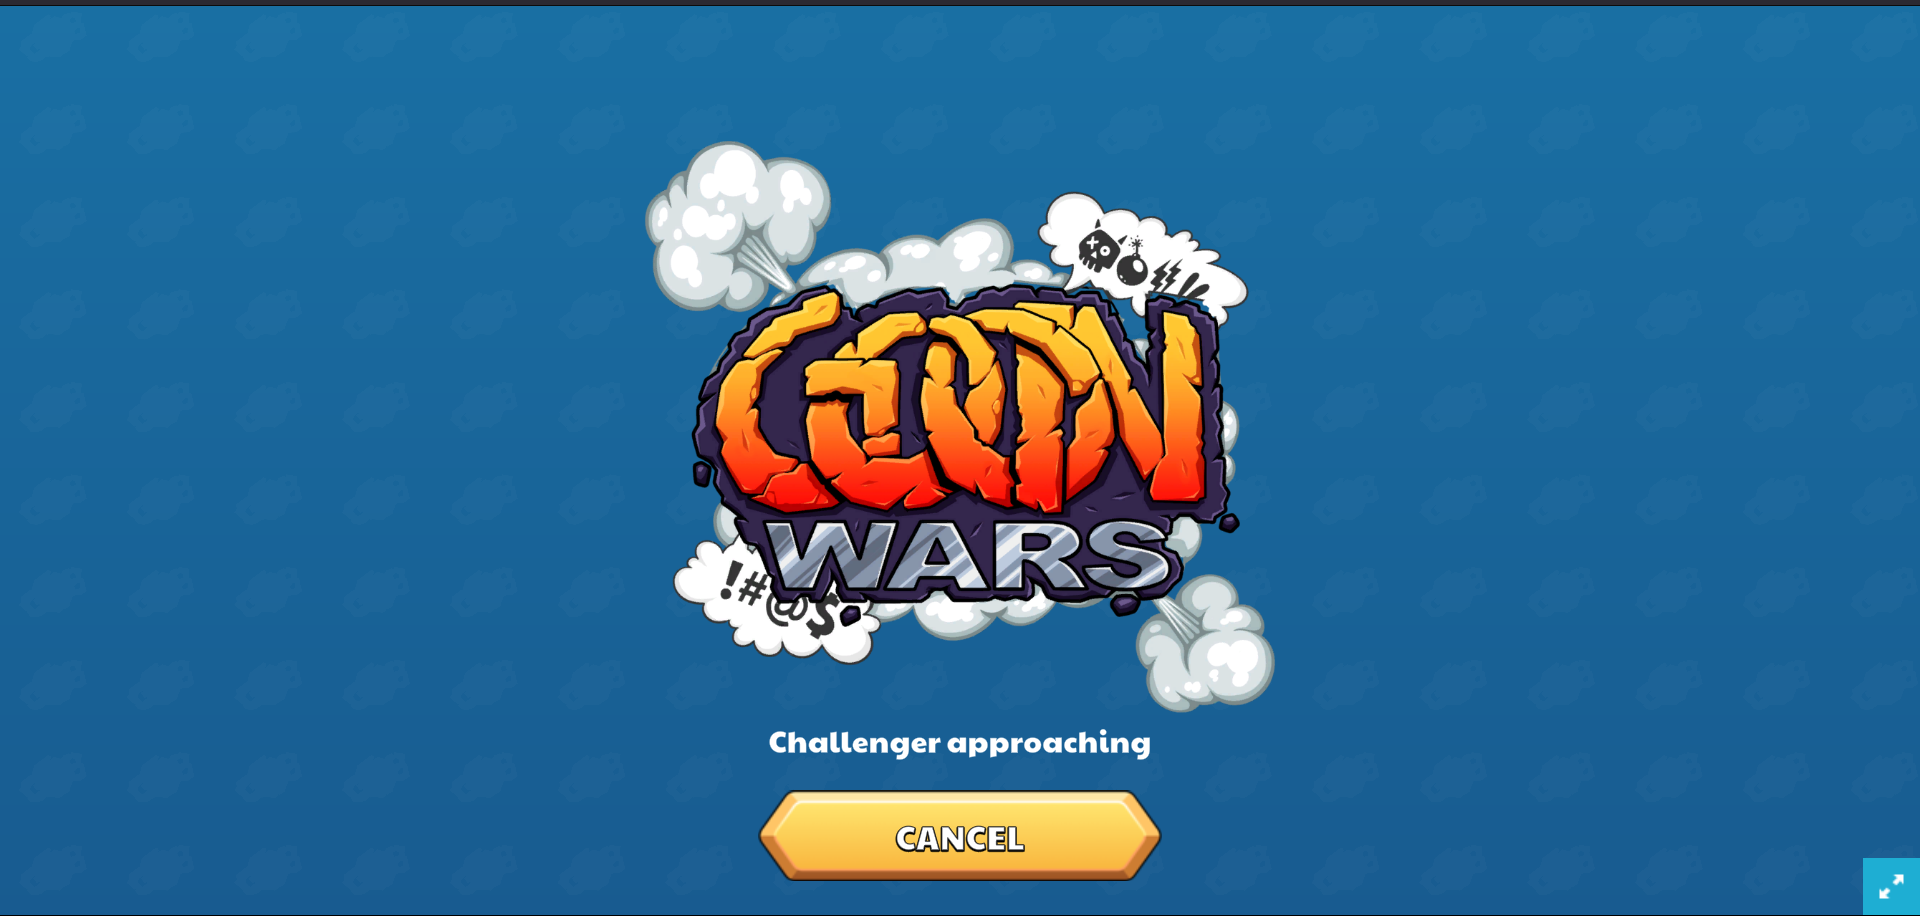 In the loading screen, players can wait and see the amazing 'Goon Wars' logo on their screen. Once the system matches the player with an opponent, the opponent's name will appear.